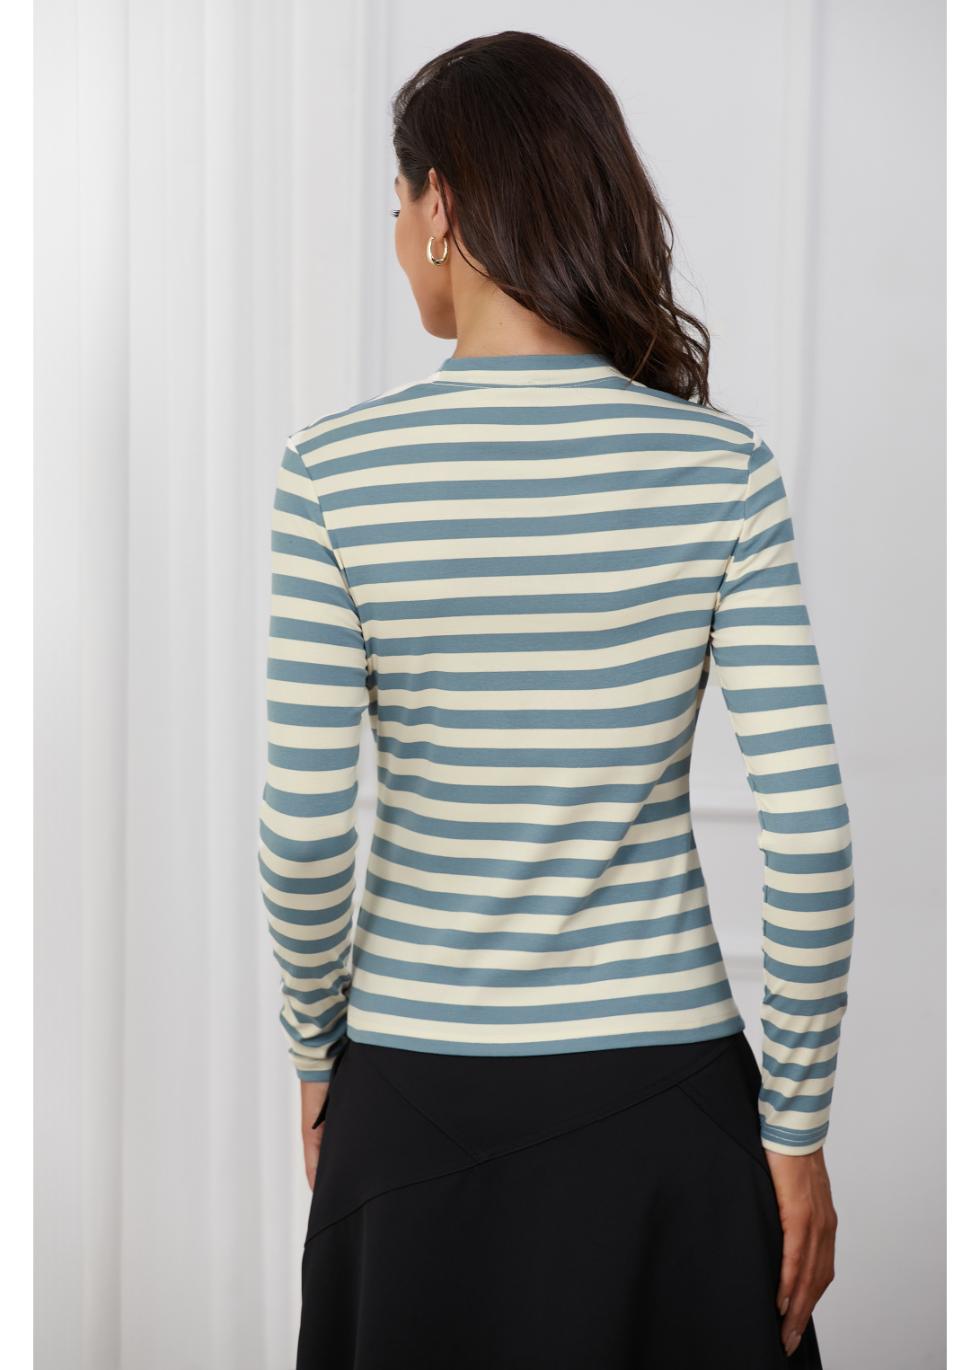 Blue and White Striped Shirt